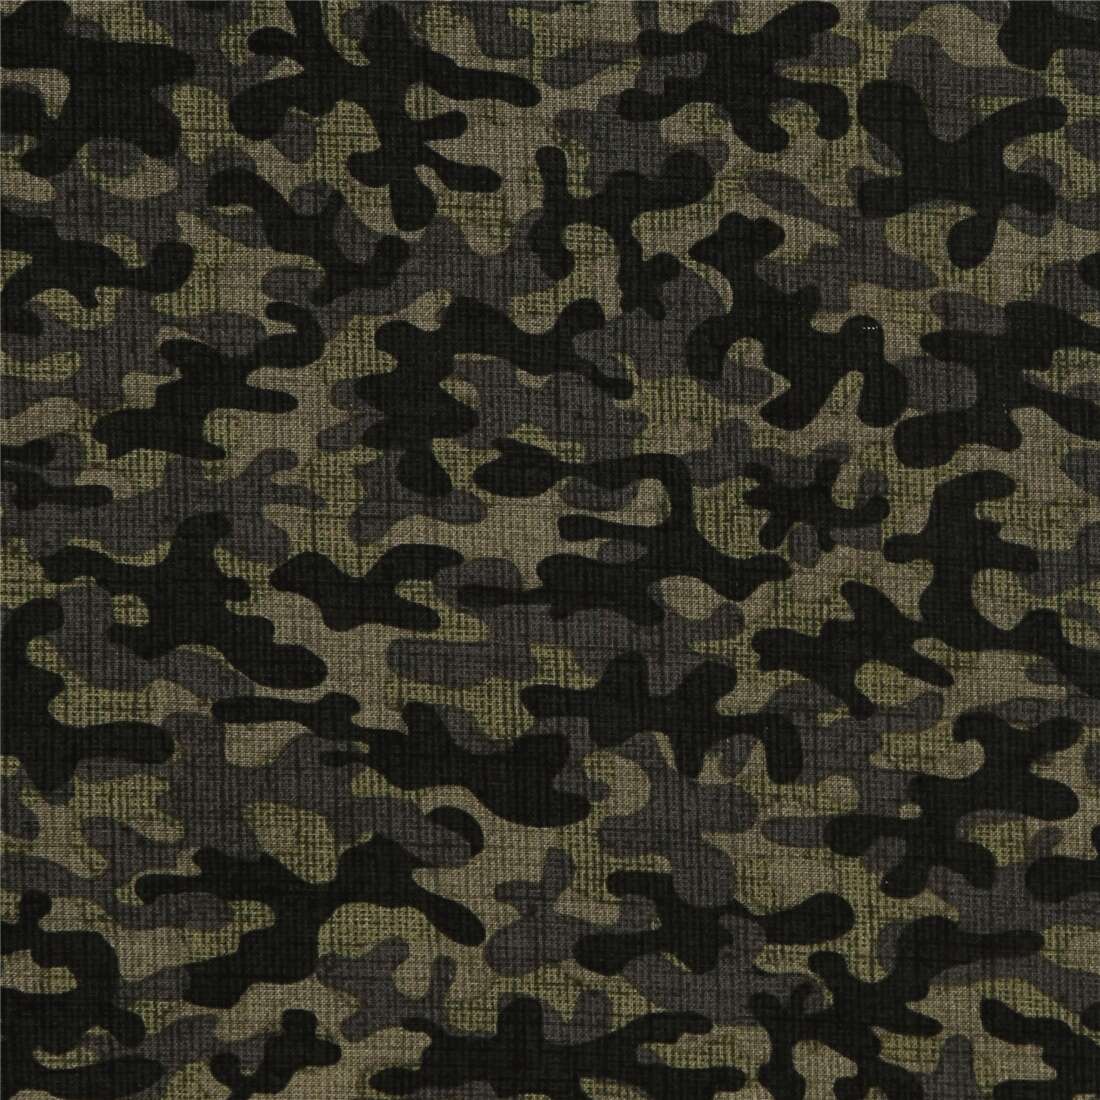 Textured Camouflage Olive Green Fabric by Timeless Treasures - modeS4u